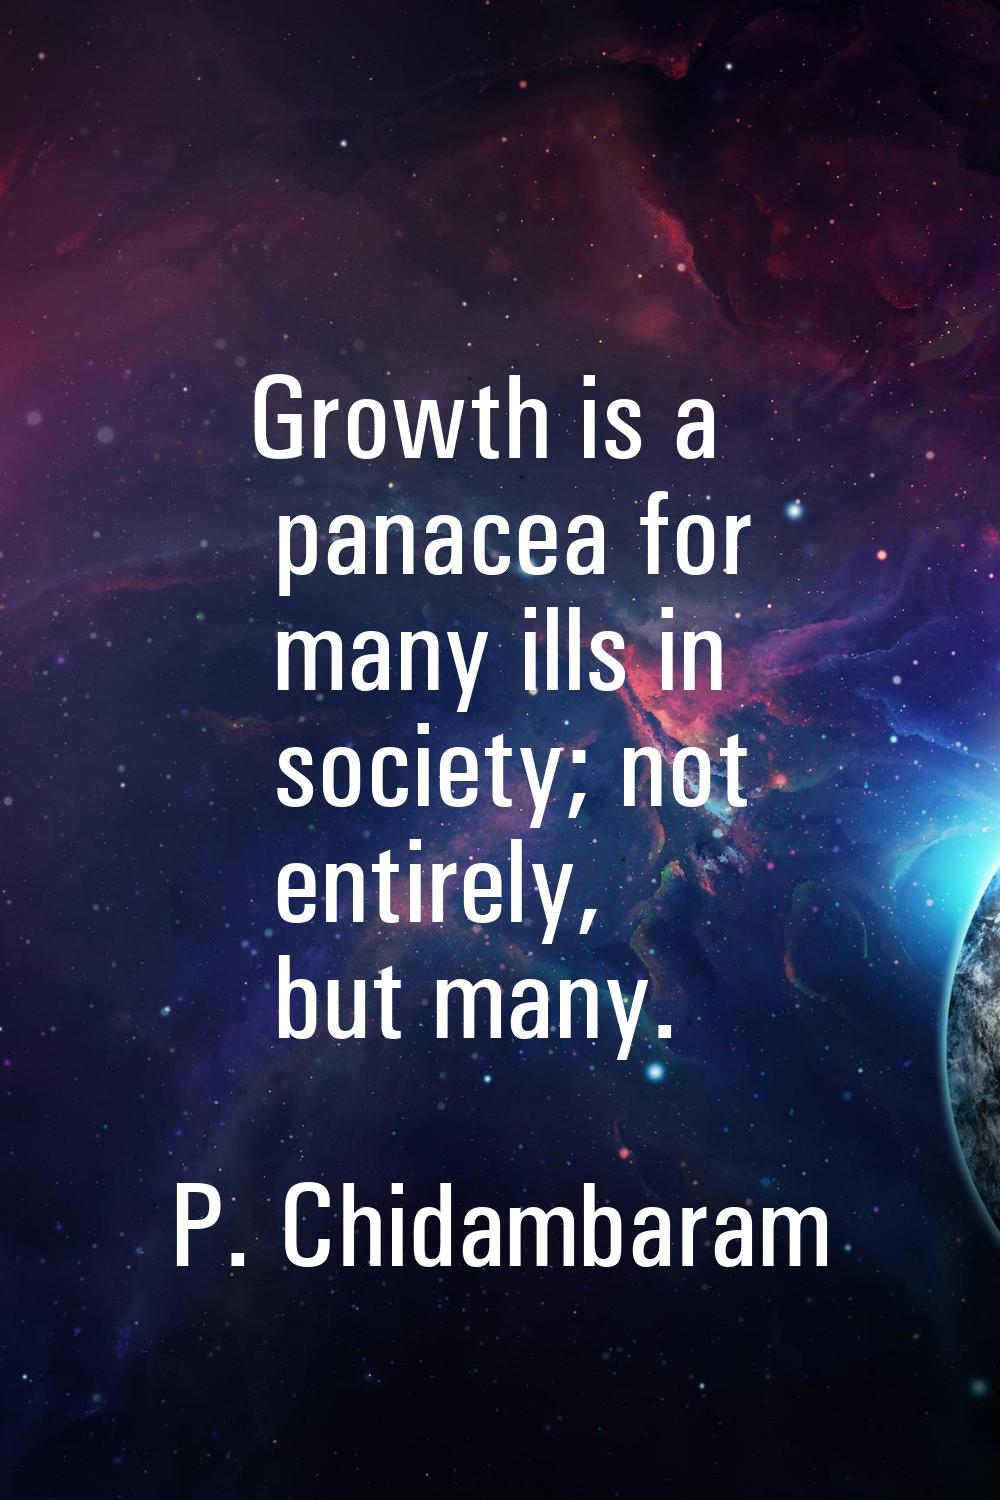 Growth is a panacea for many ills in society; not entirely, but many.